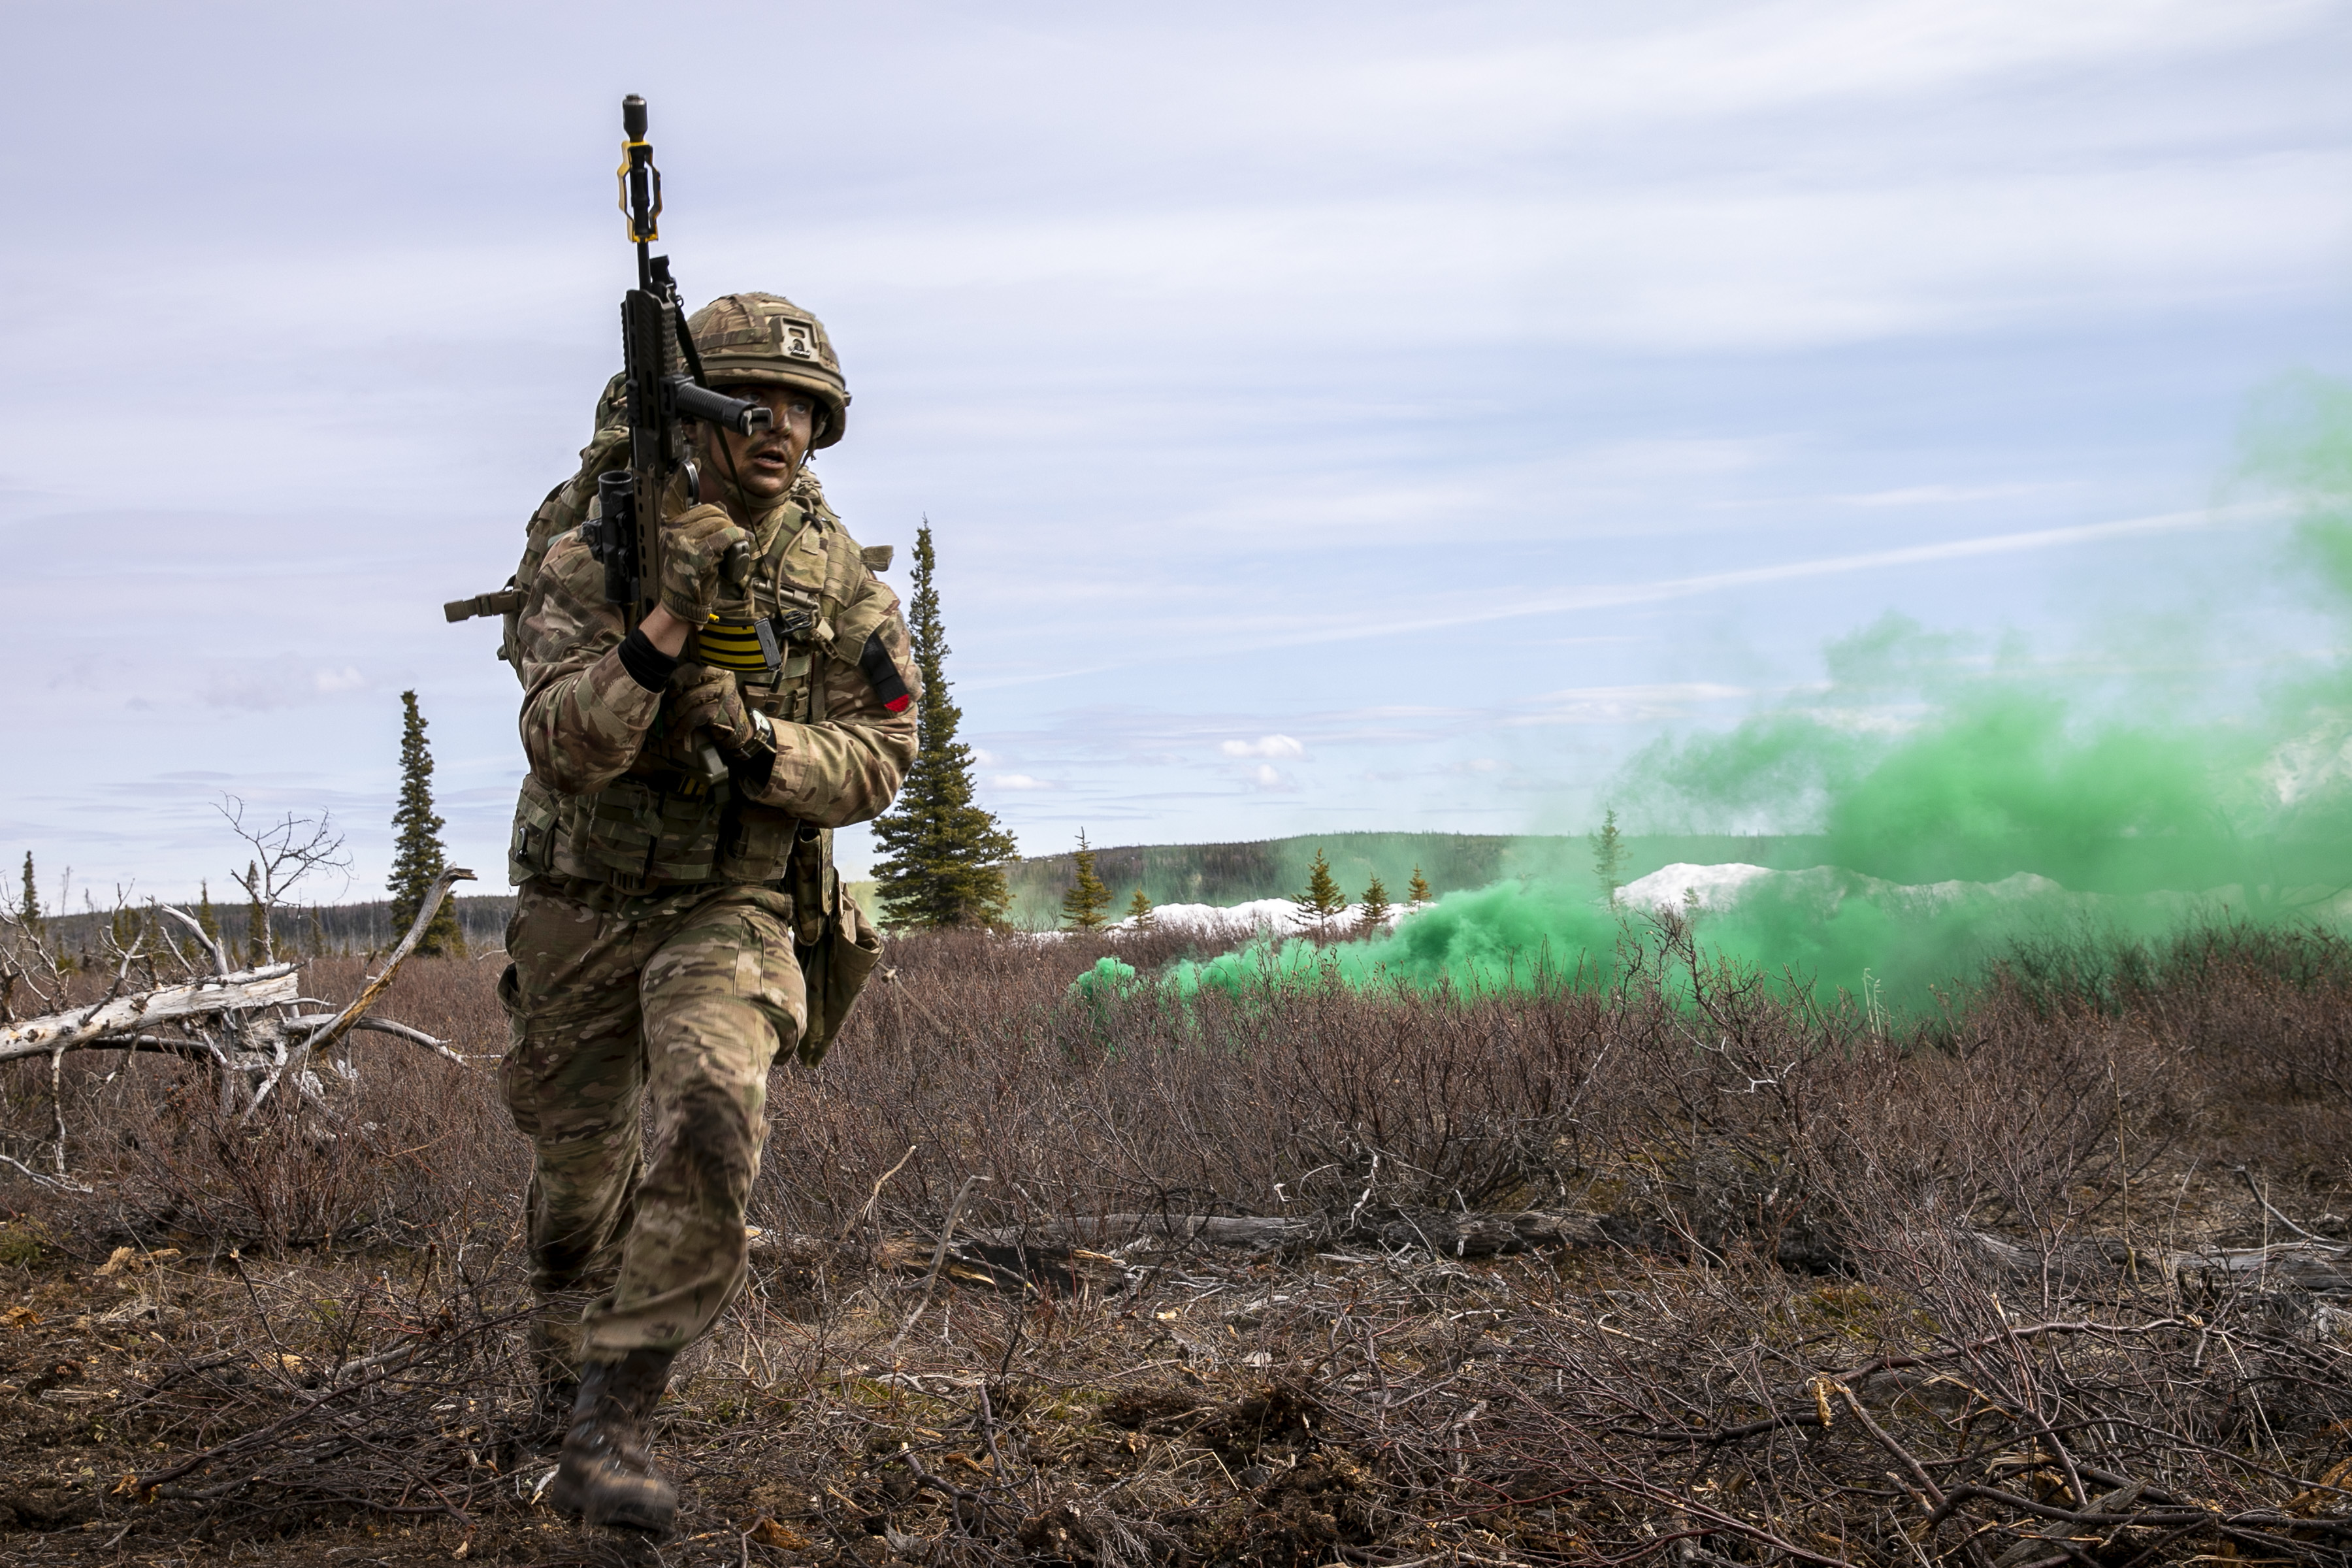 RAF Regiment with rifle runs away from green flare.